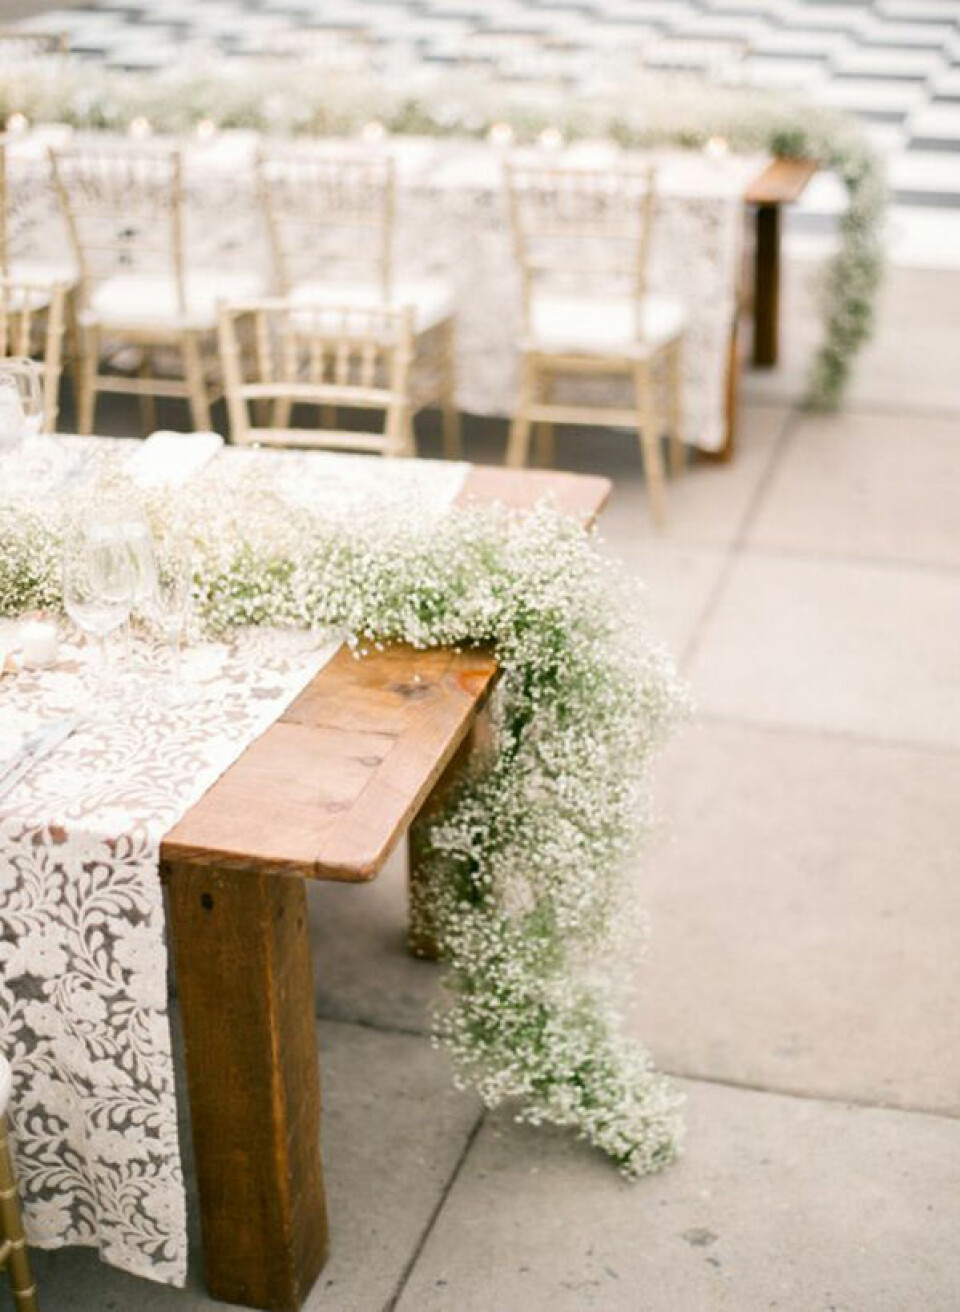 Bildkälla https://www.stylemepretty.com/2016/06/28/see-why-this-wedding-wins-the-award-for-most-unique-venue-ever/